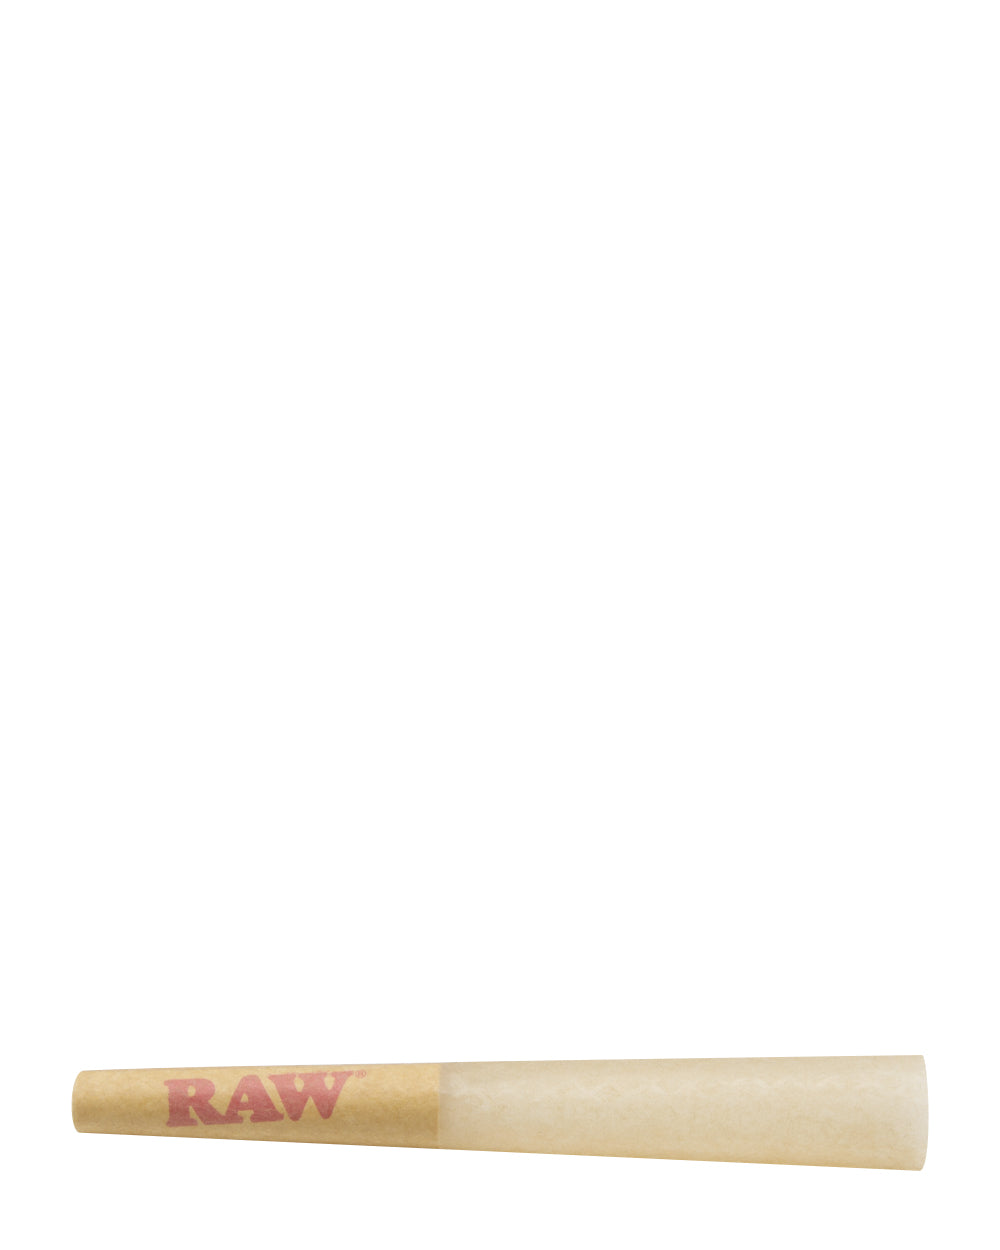 RAW | Classic Single Size Pre-Rolled Cones | 70mm - Unbleached Paper - 960 Count - 4